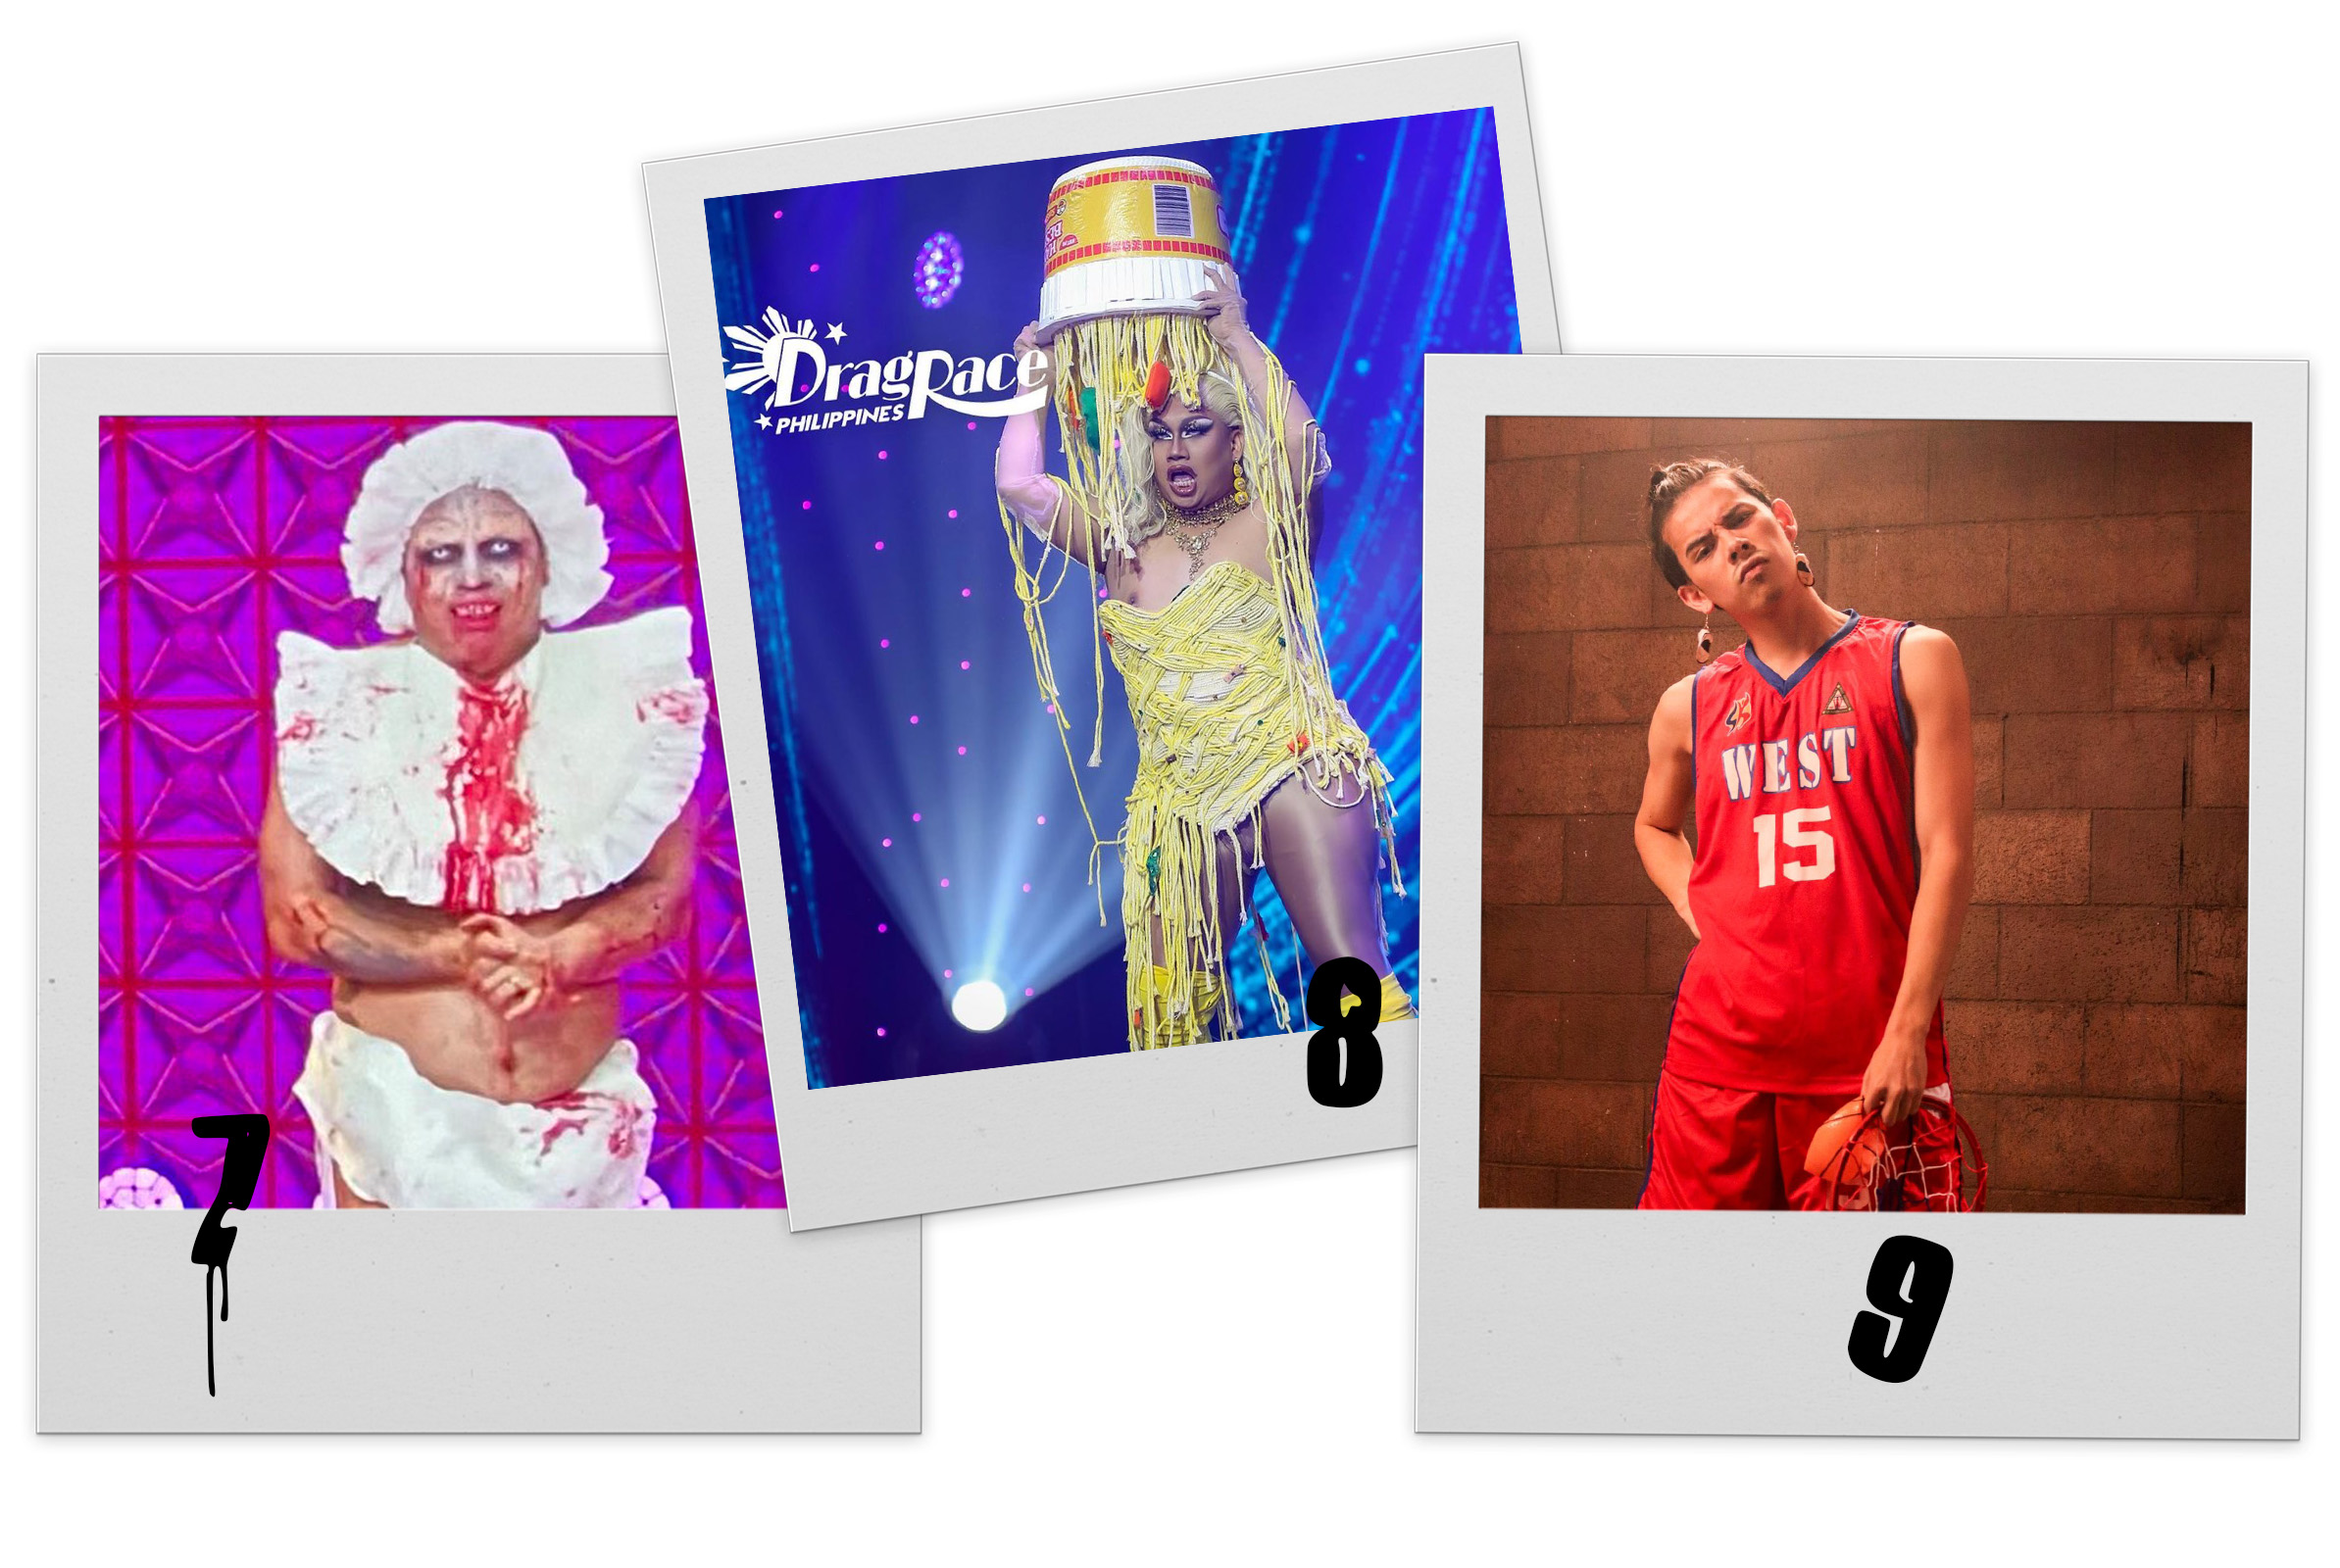 Halloween costumes inspired by drag queens